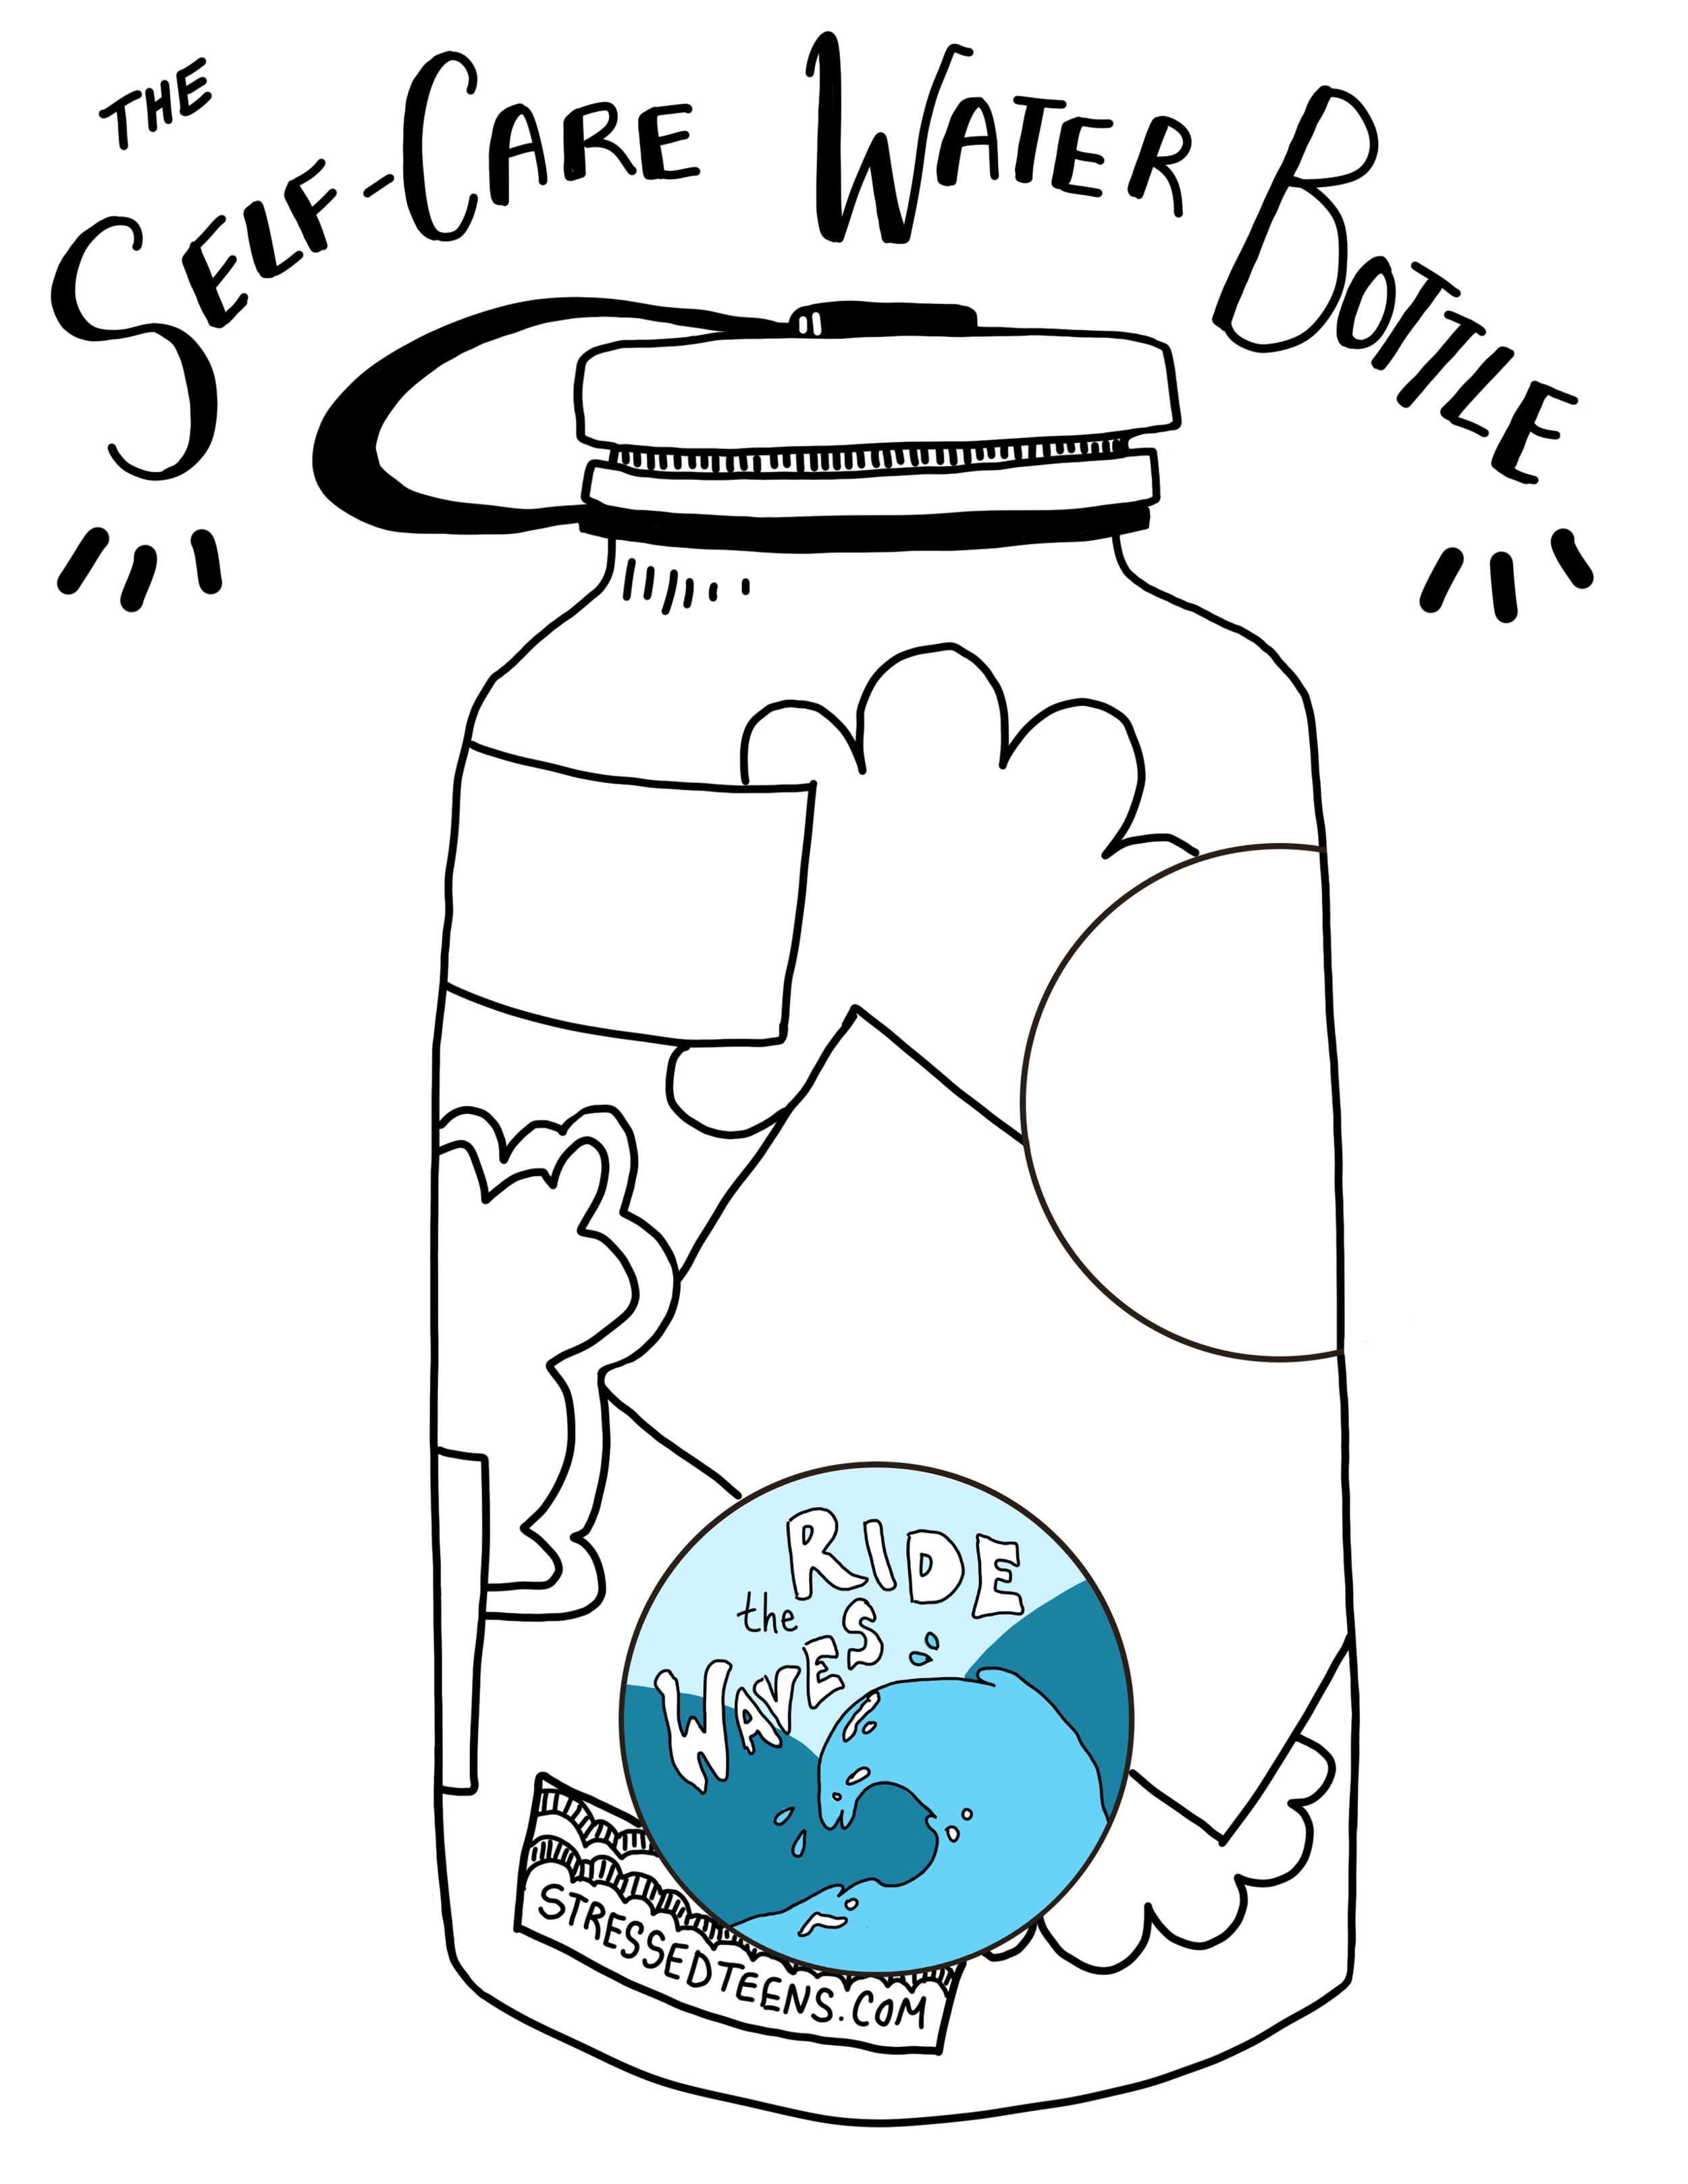 self care water bottle.png